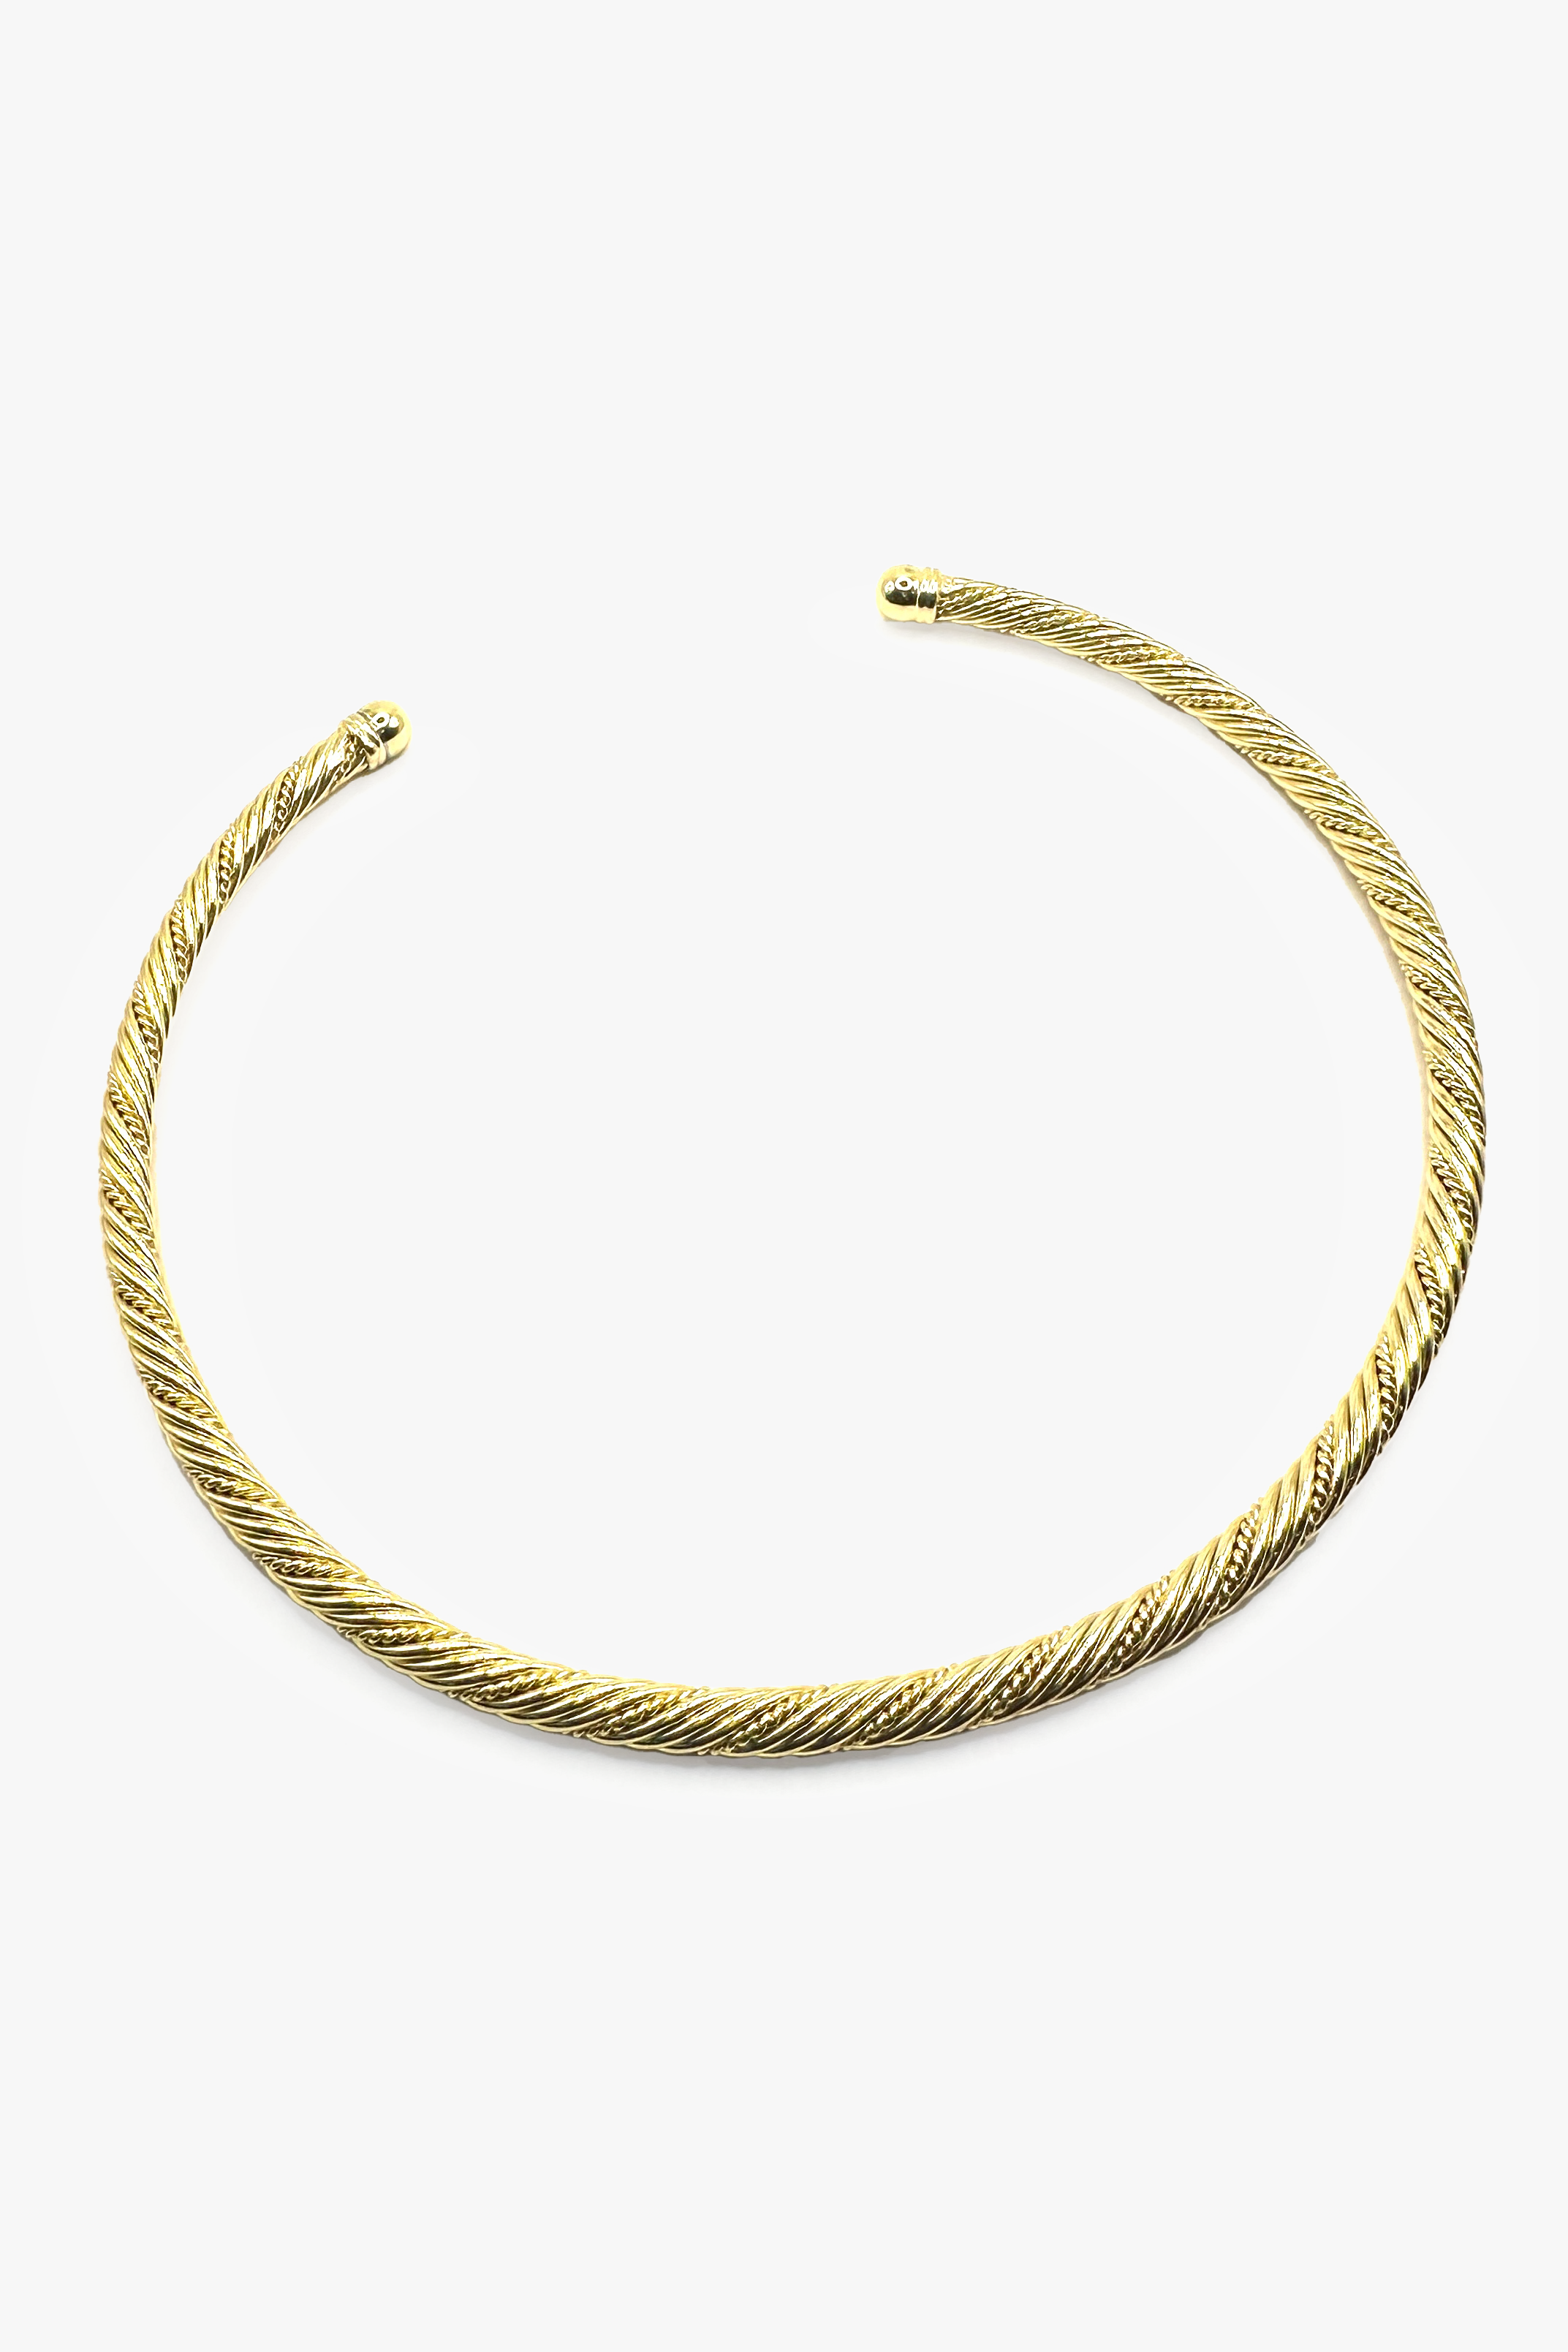 GOLD CLEOPATRA NECKLACE